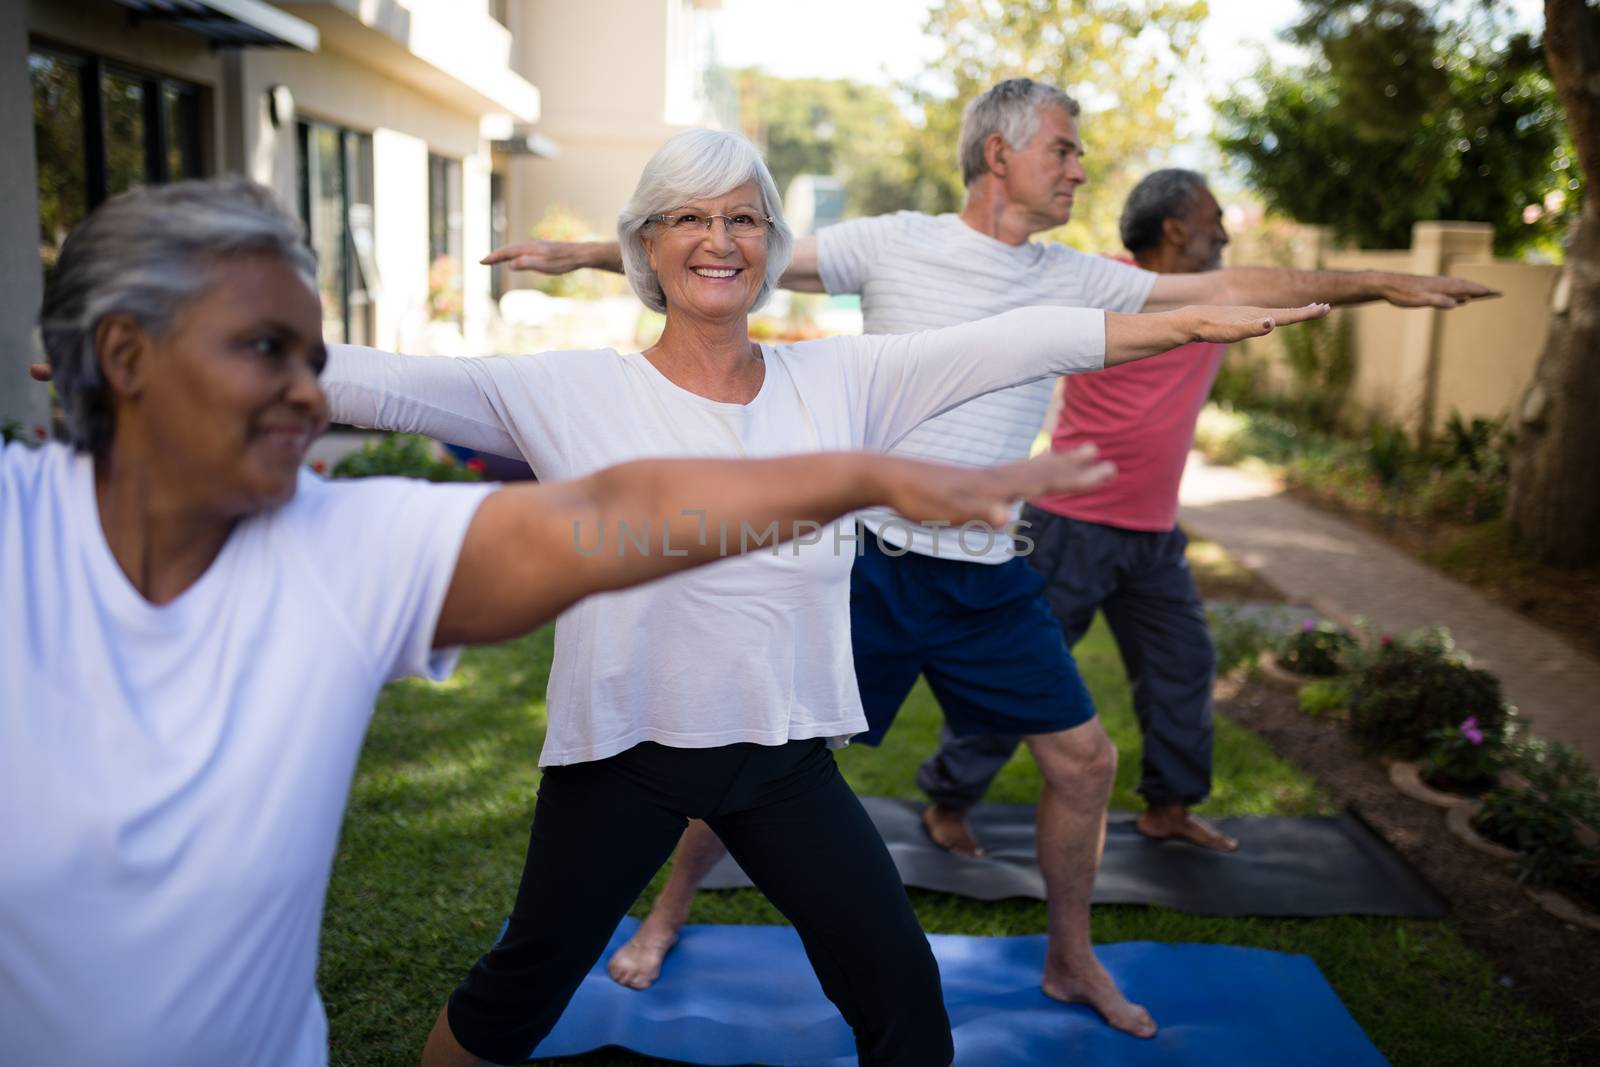 Smiling senior woman exercising with friends on yoga mats at park